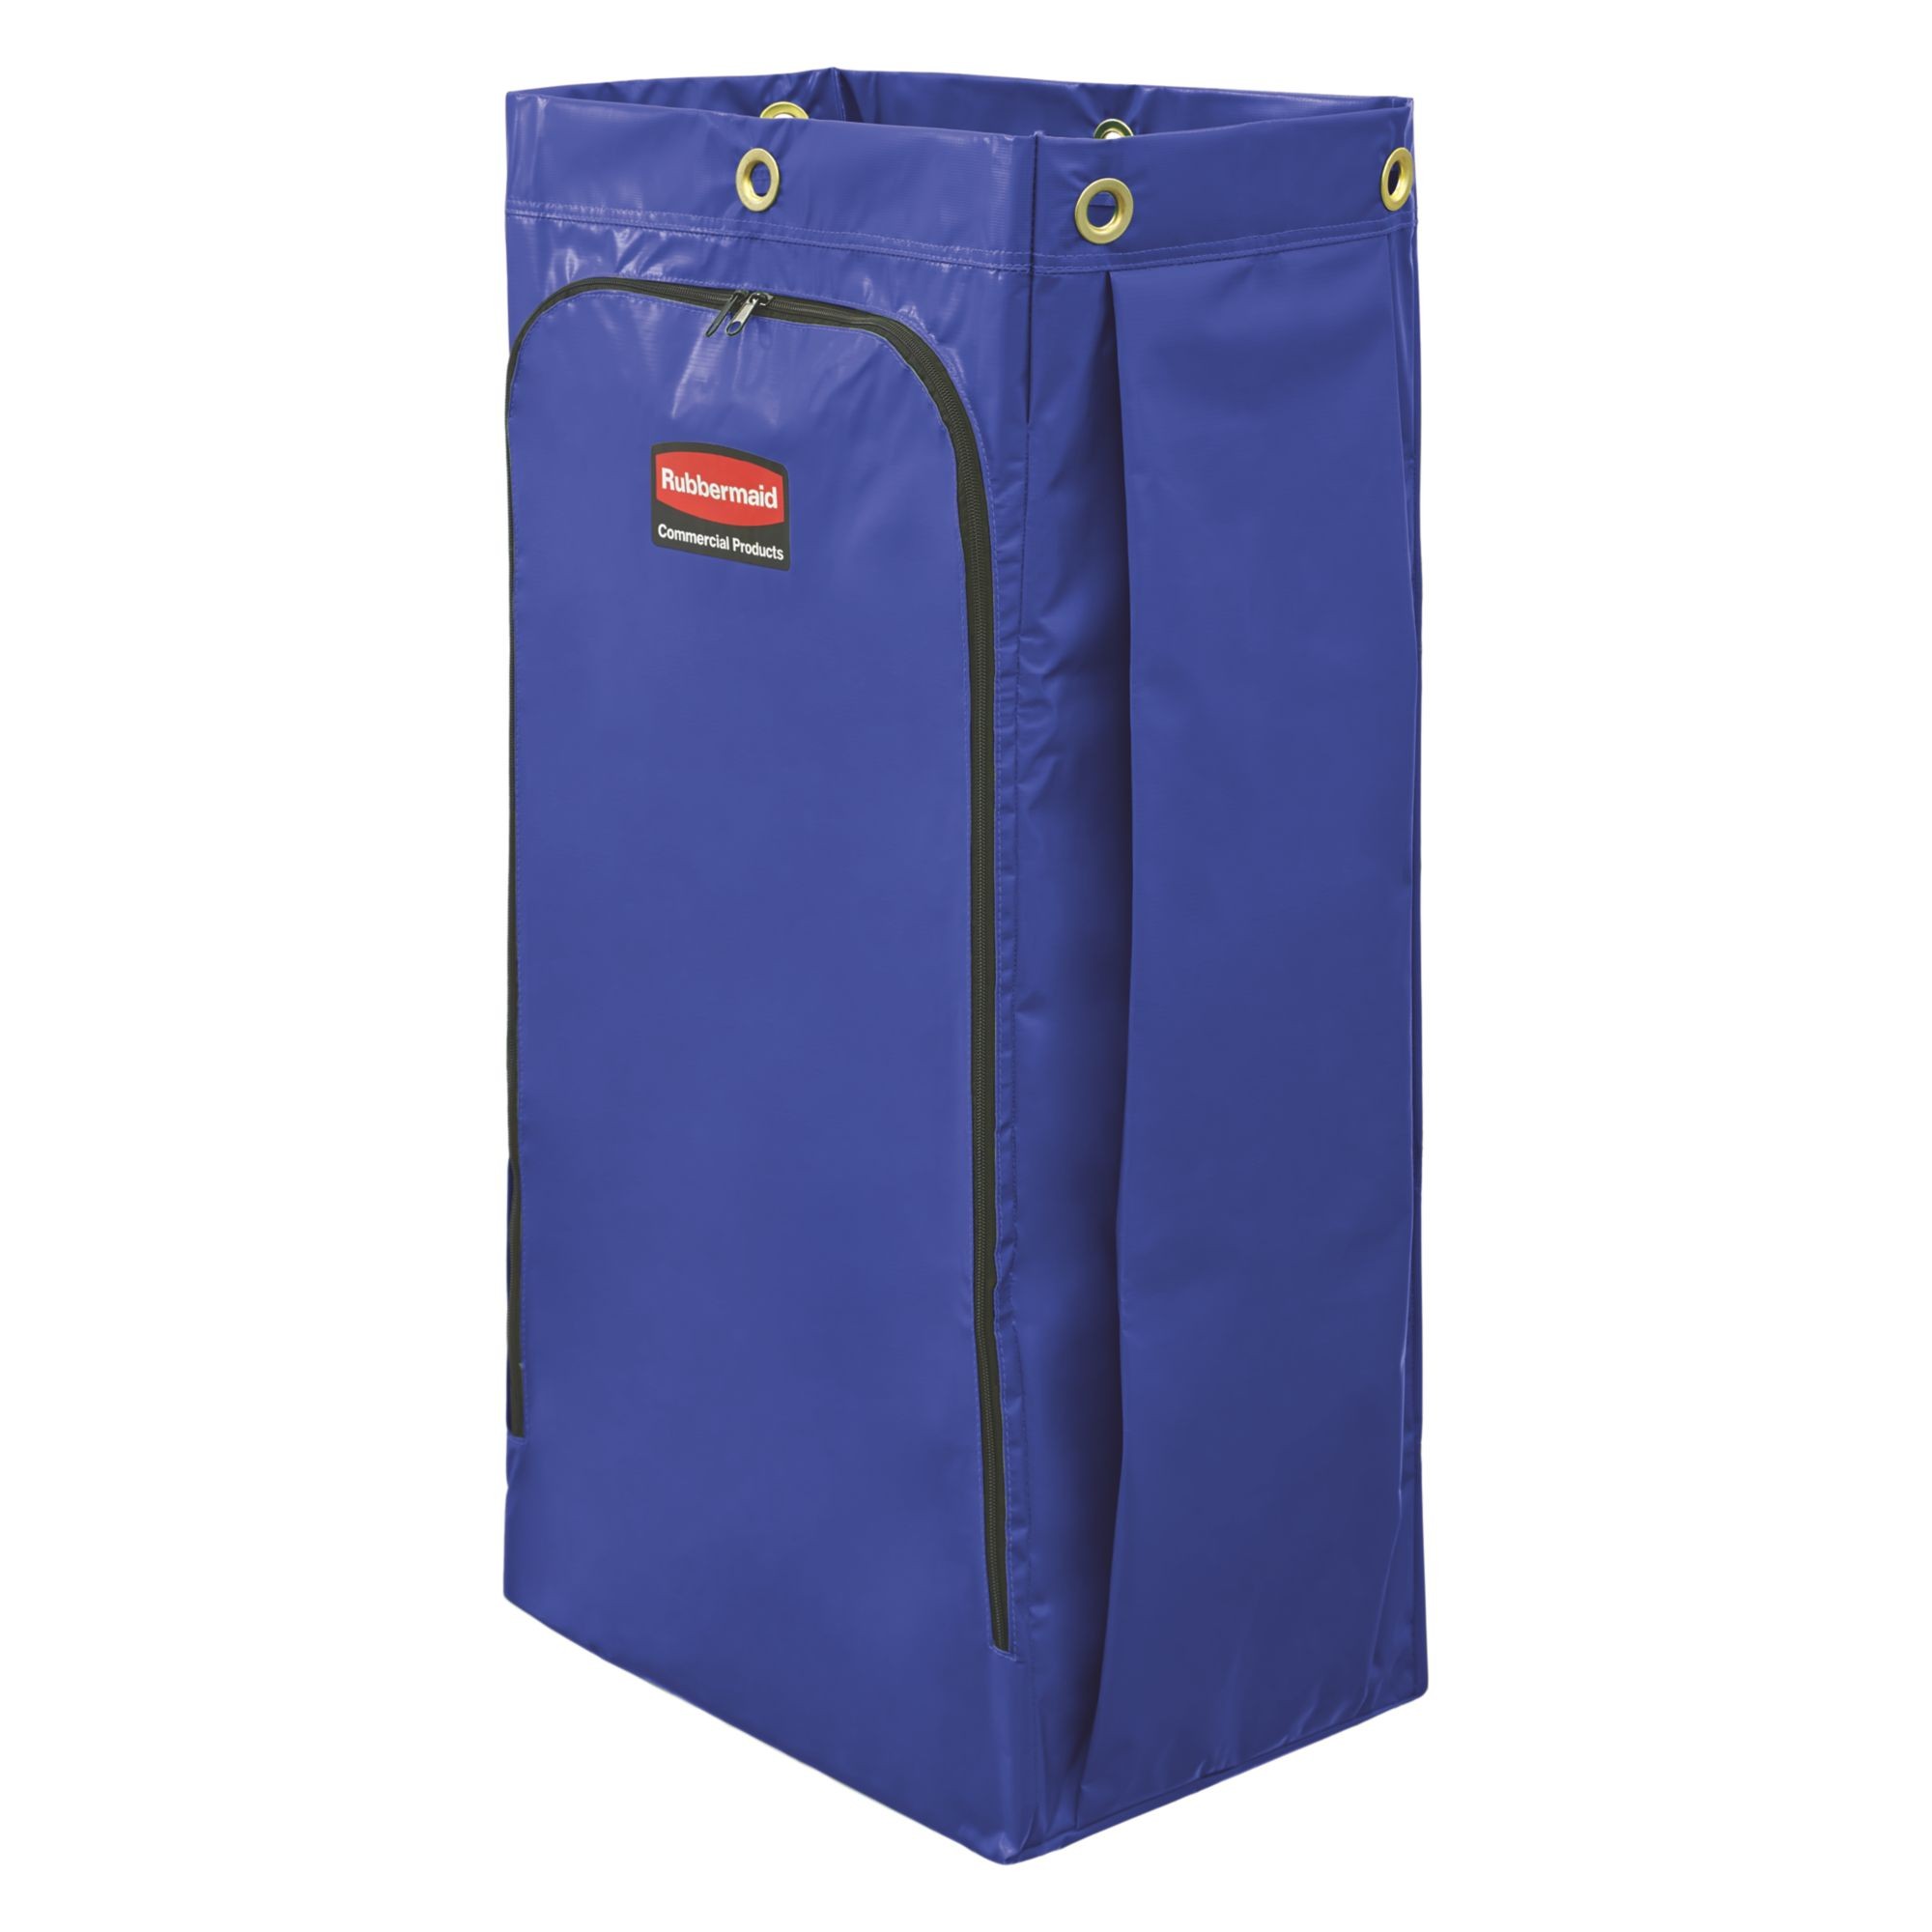 Rubbermaid 1966883 Janitor Cart Replacement Bag, 26 gallon 4/Case- Blue